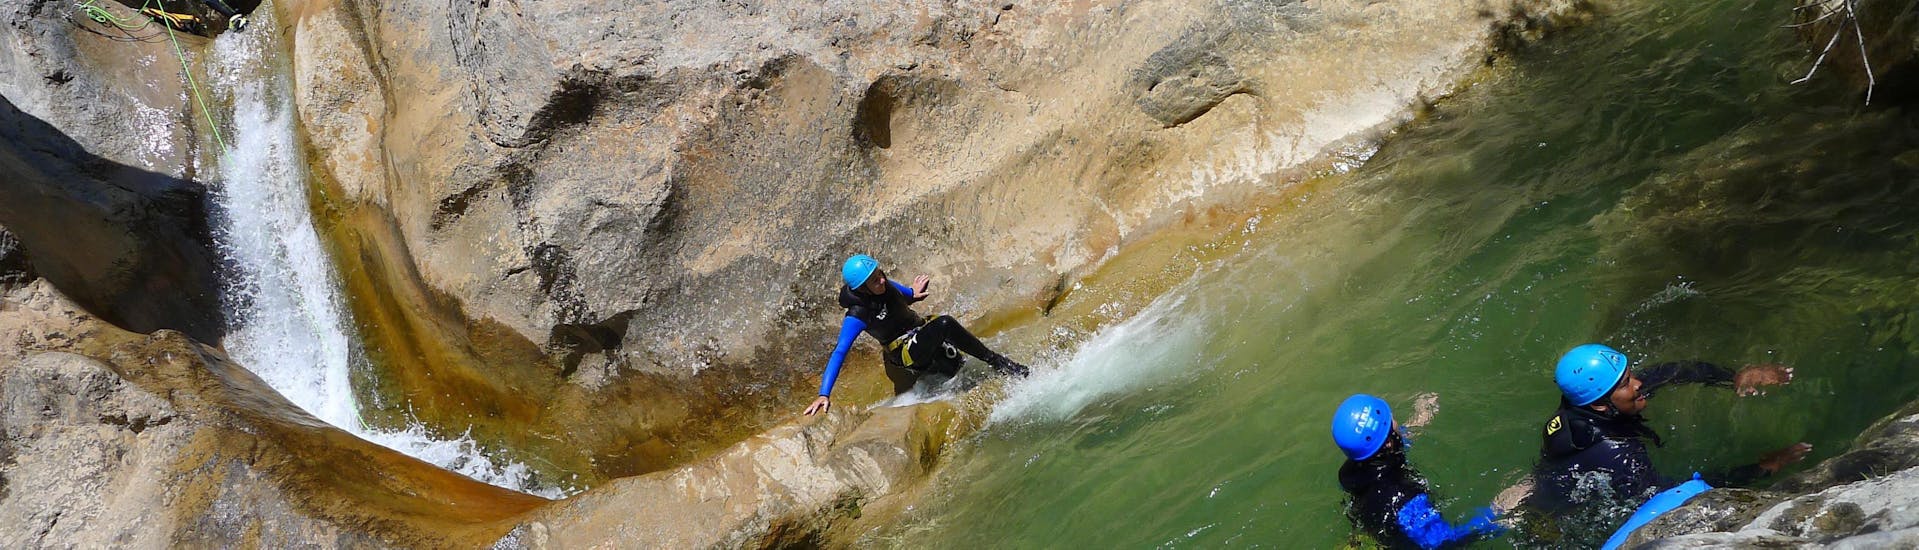 A tourist is abseiling in the Canyon of miraval in spain during the Canyoning aquatic activity with H2O vives.